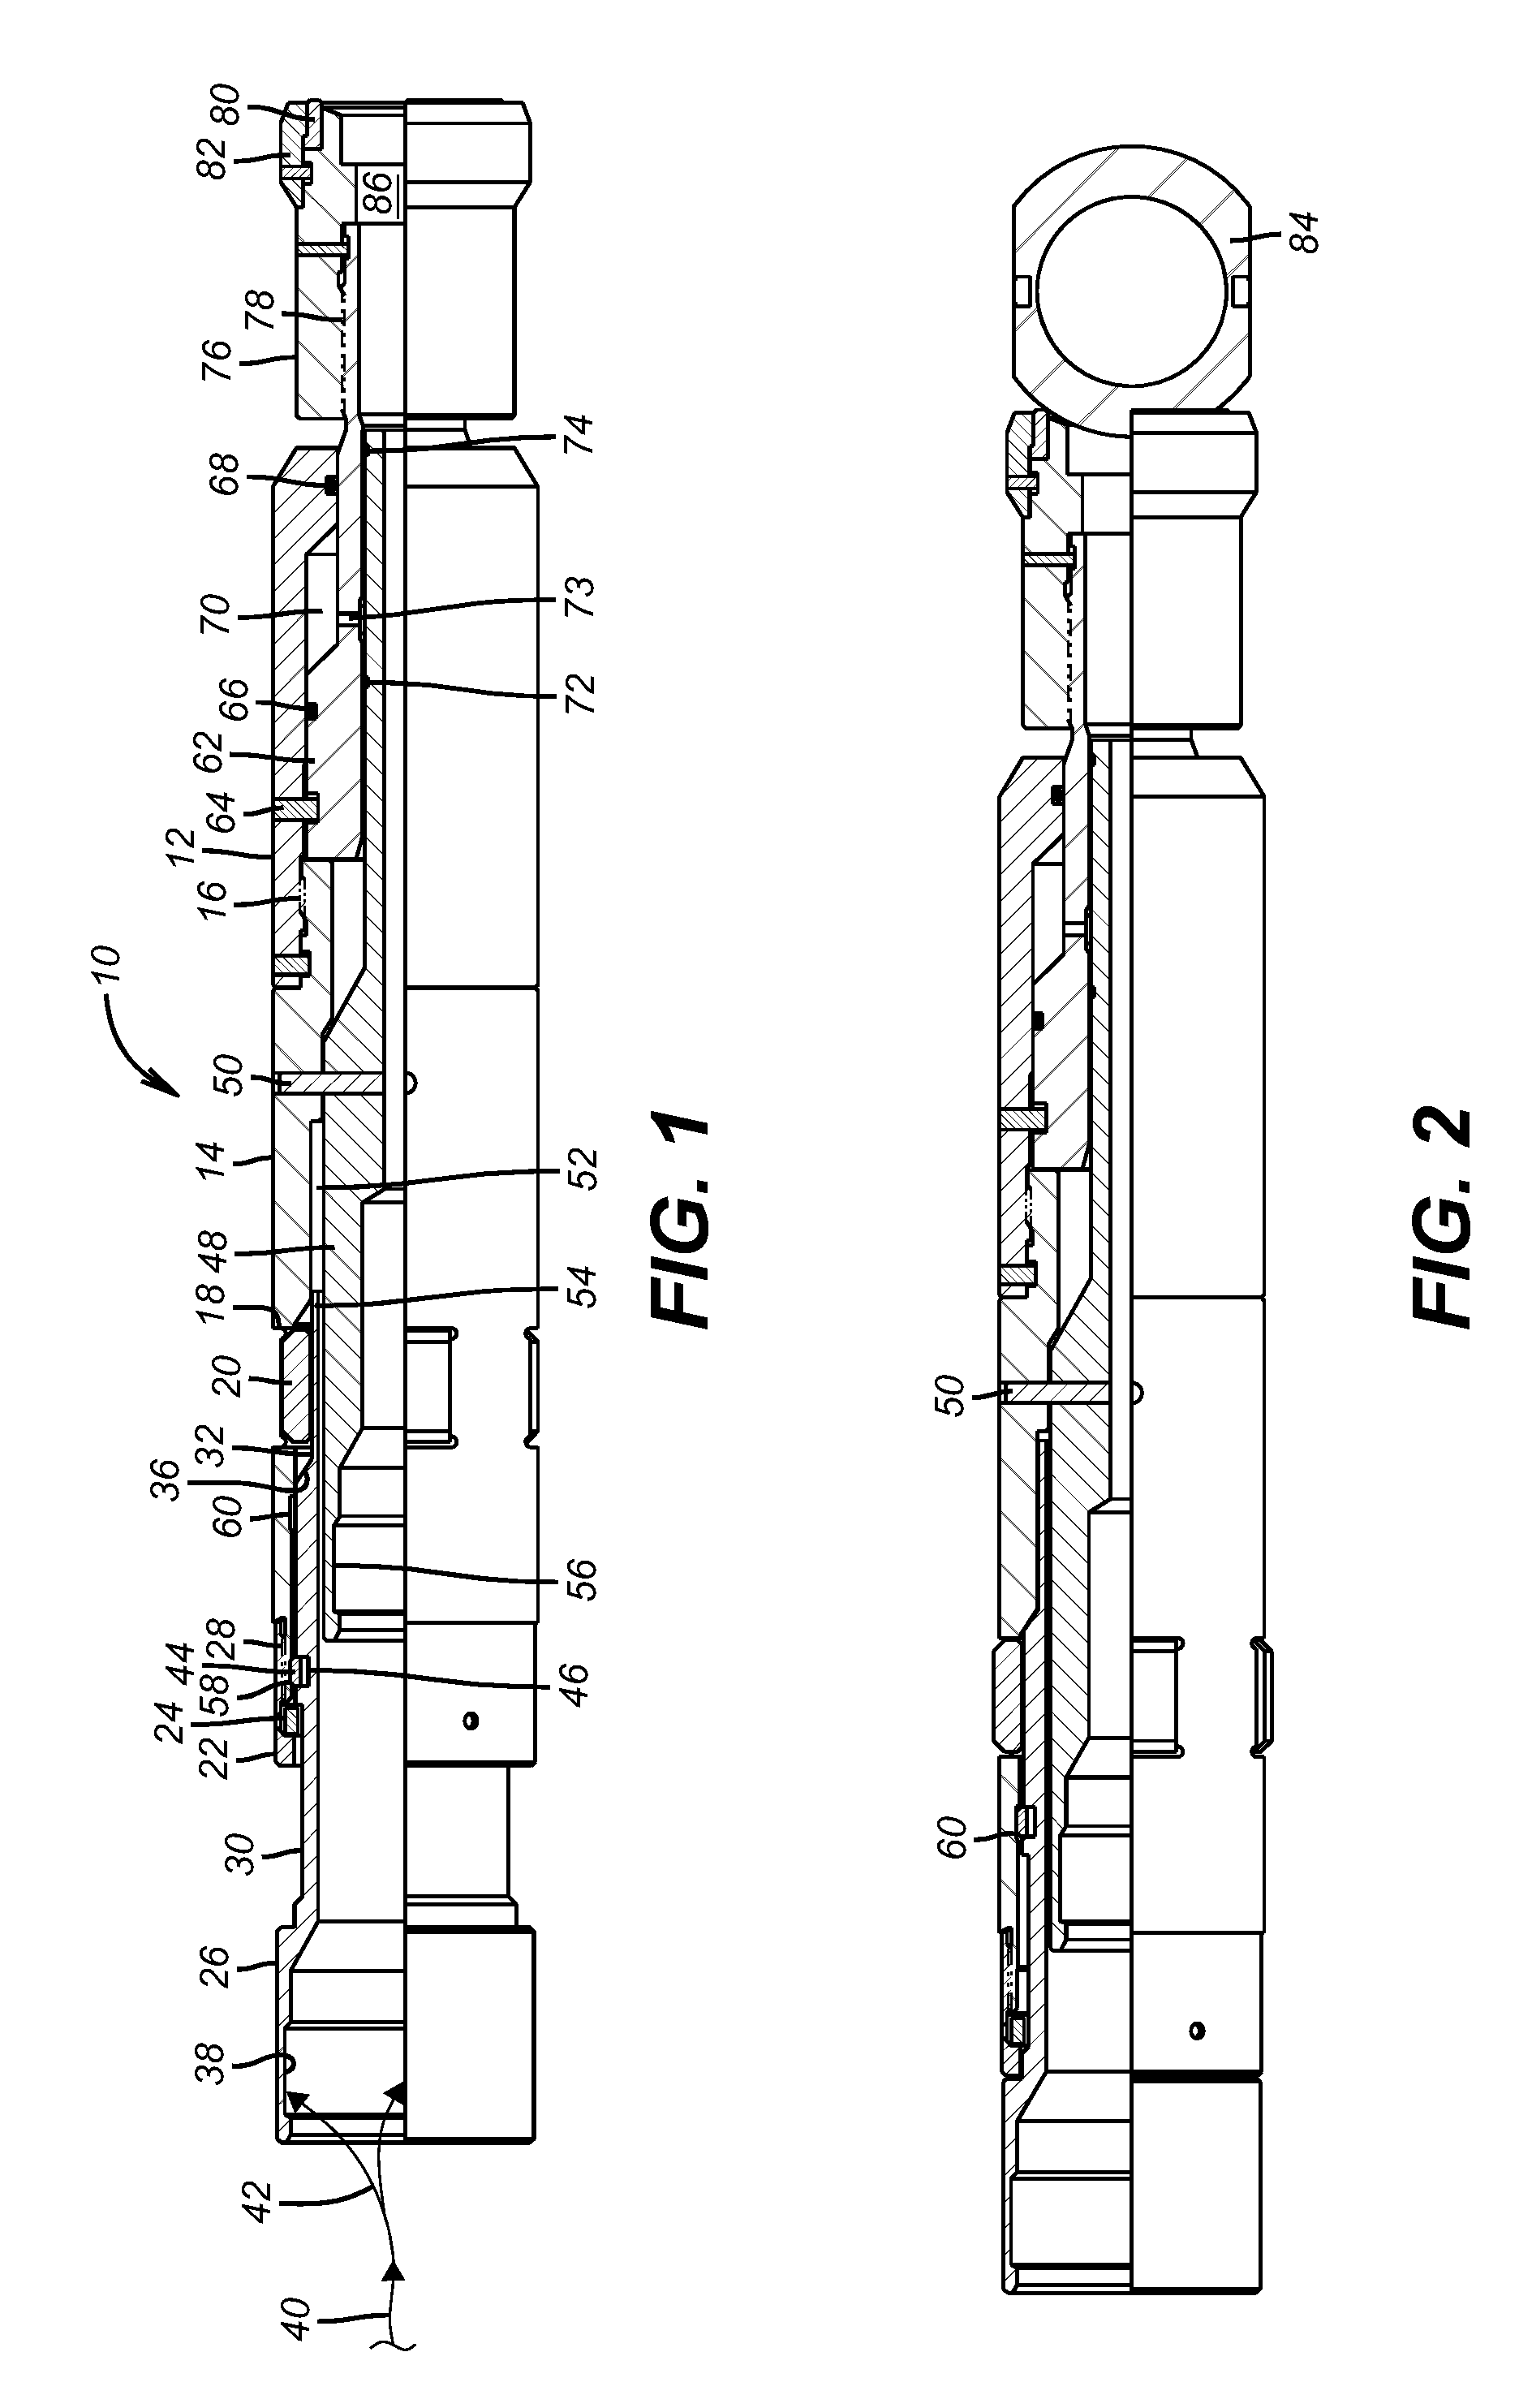 Pressure Equalization Device for Downhole Tools